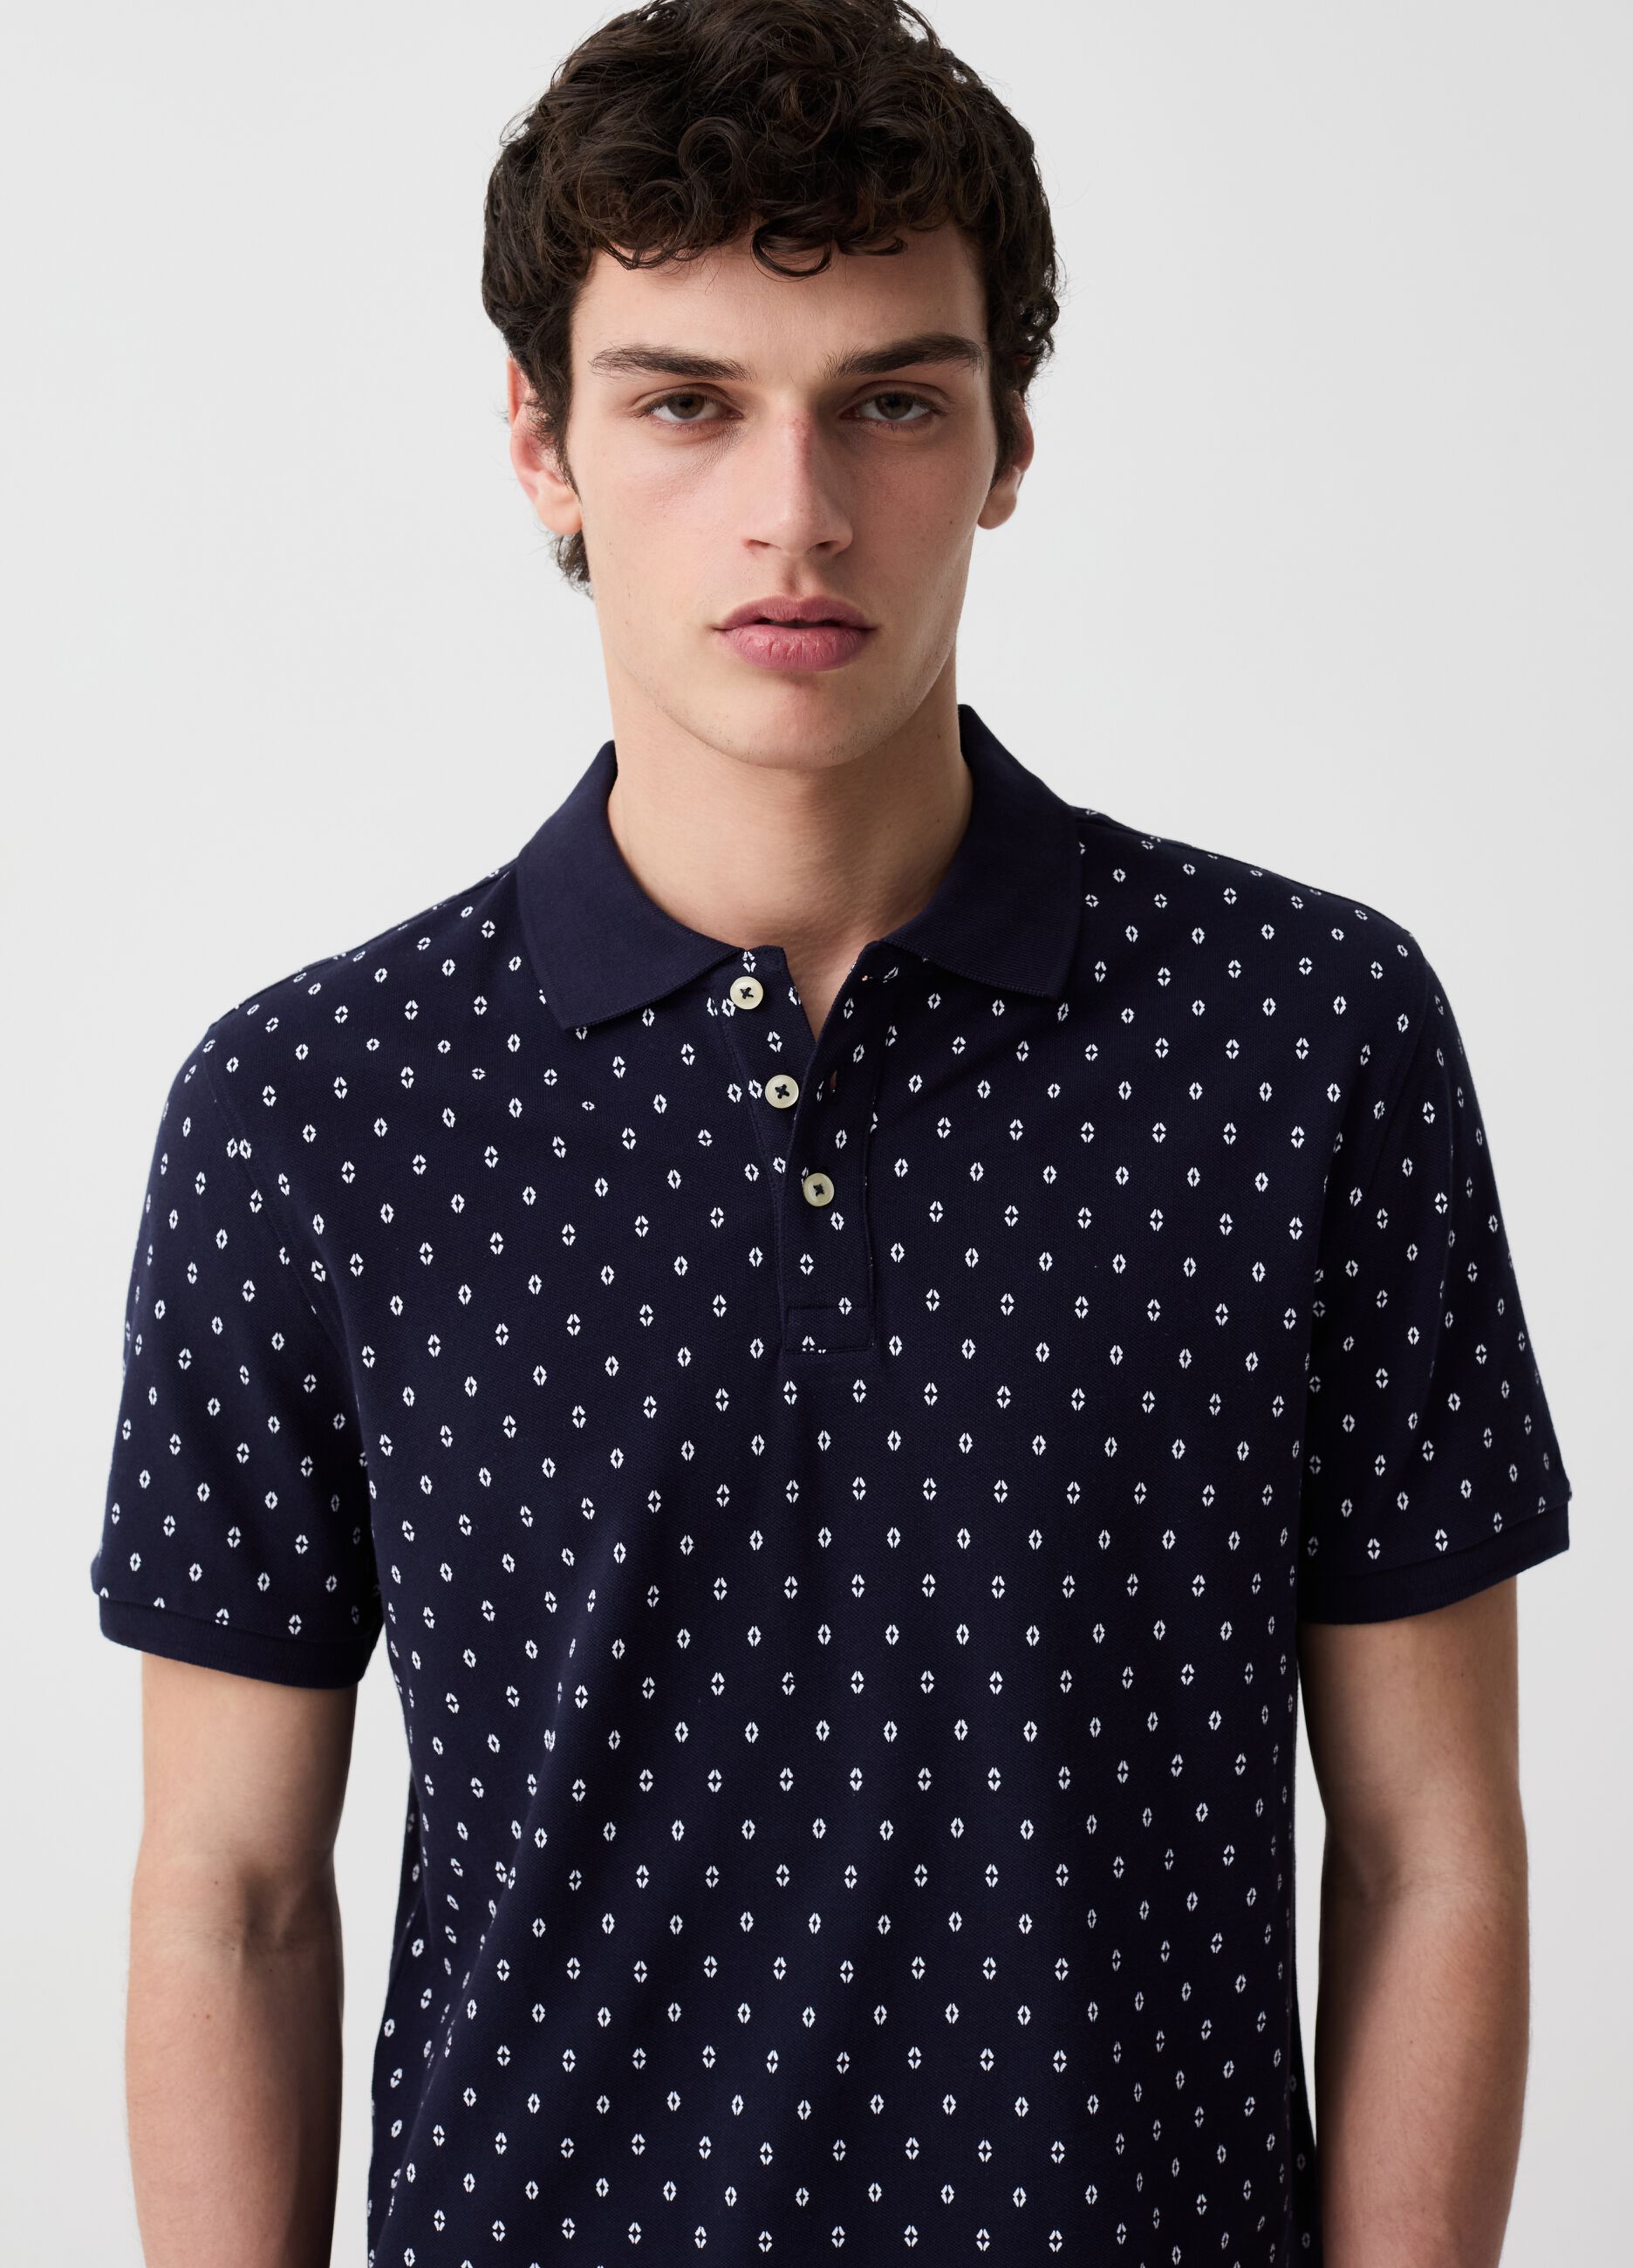 Piquet polo shirt with micro pattern